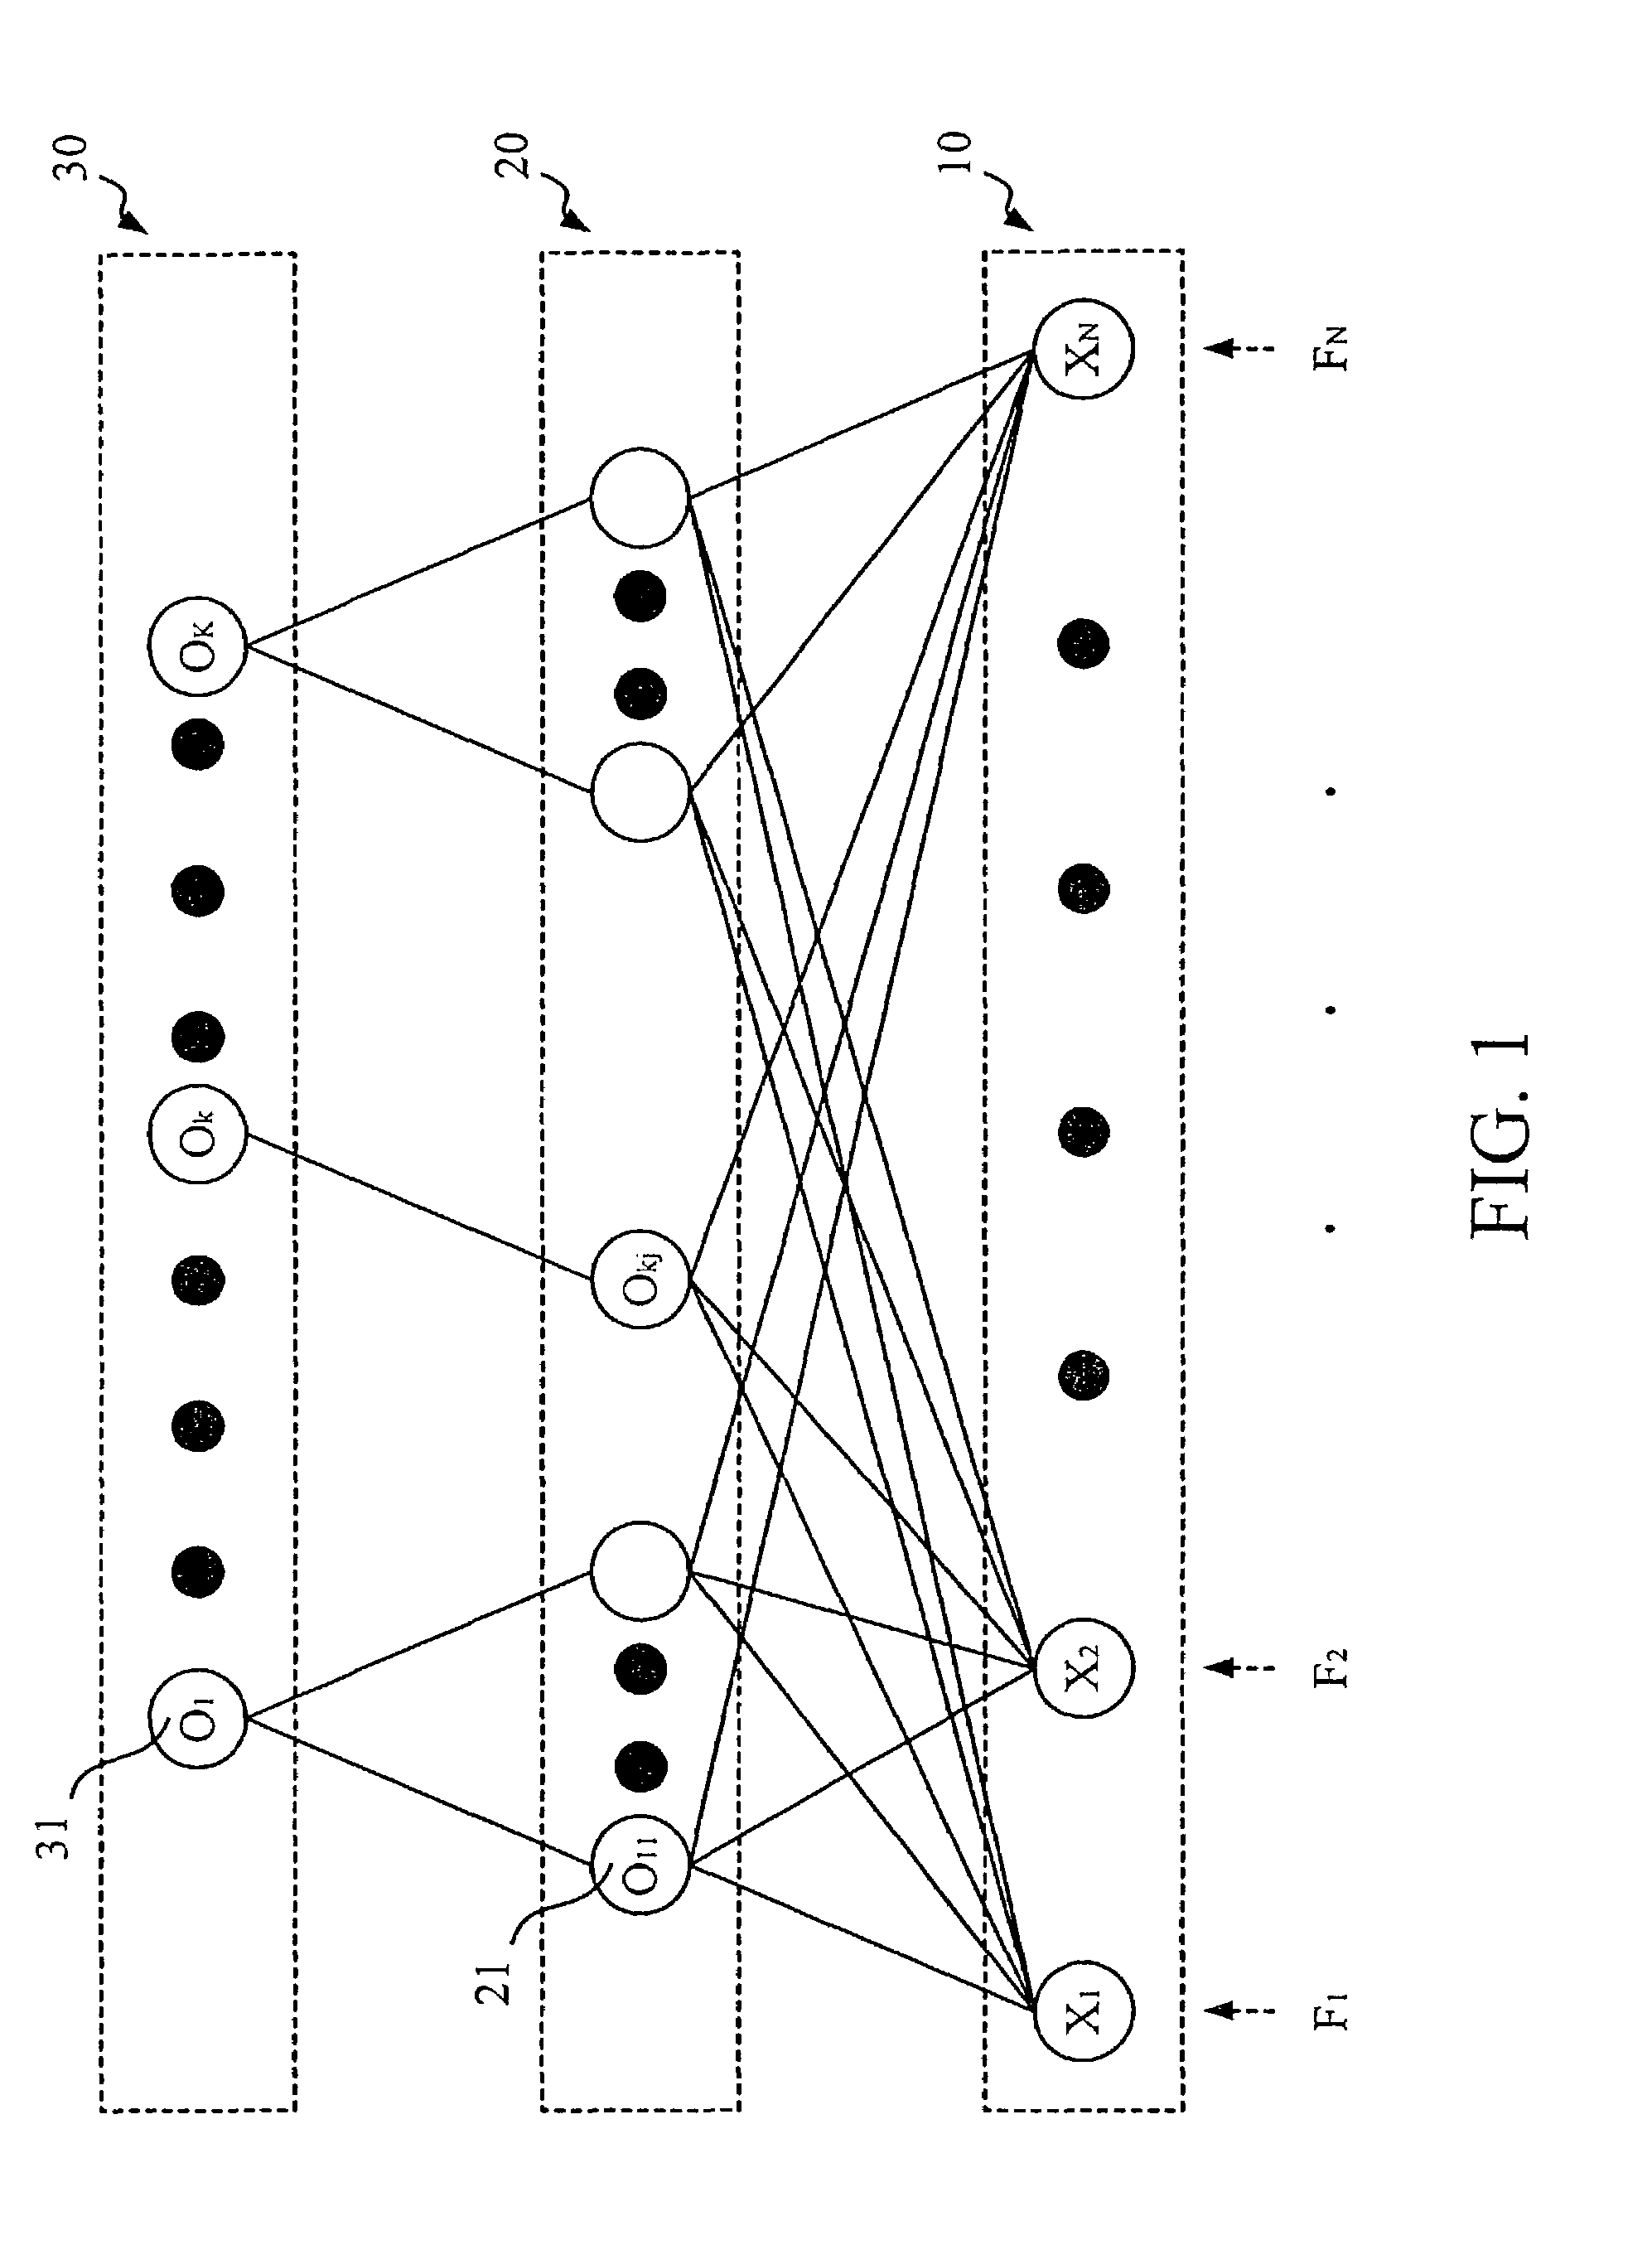 Pattern recognition method for reducing classification errors